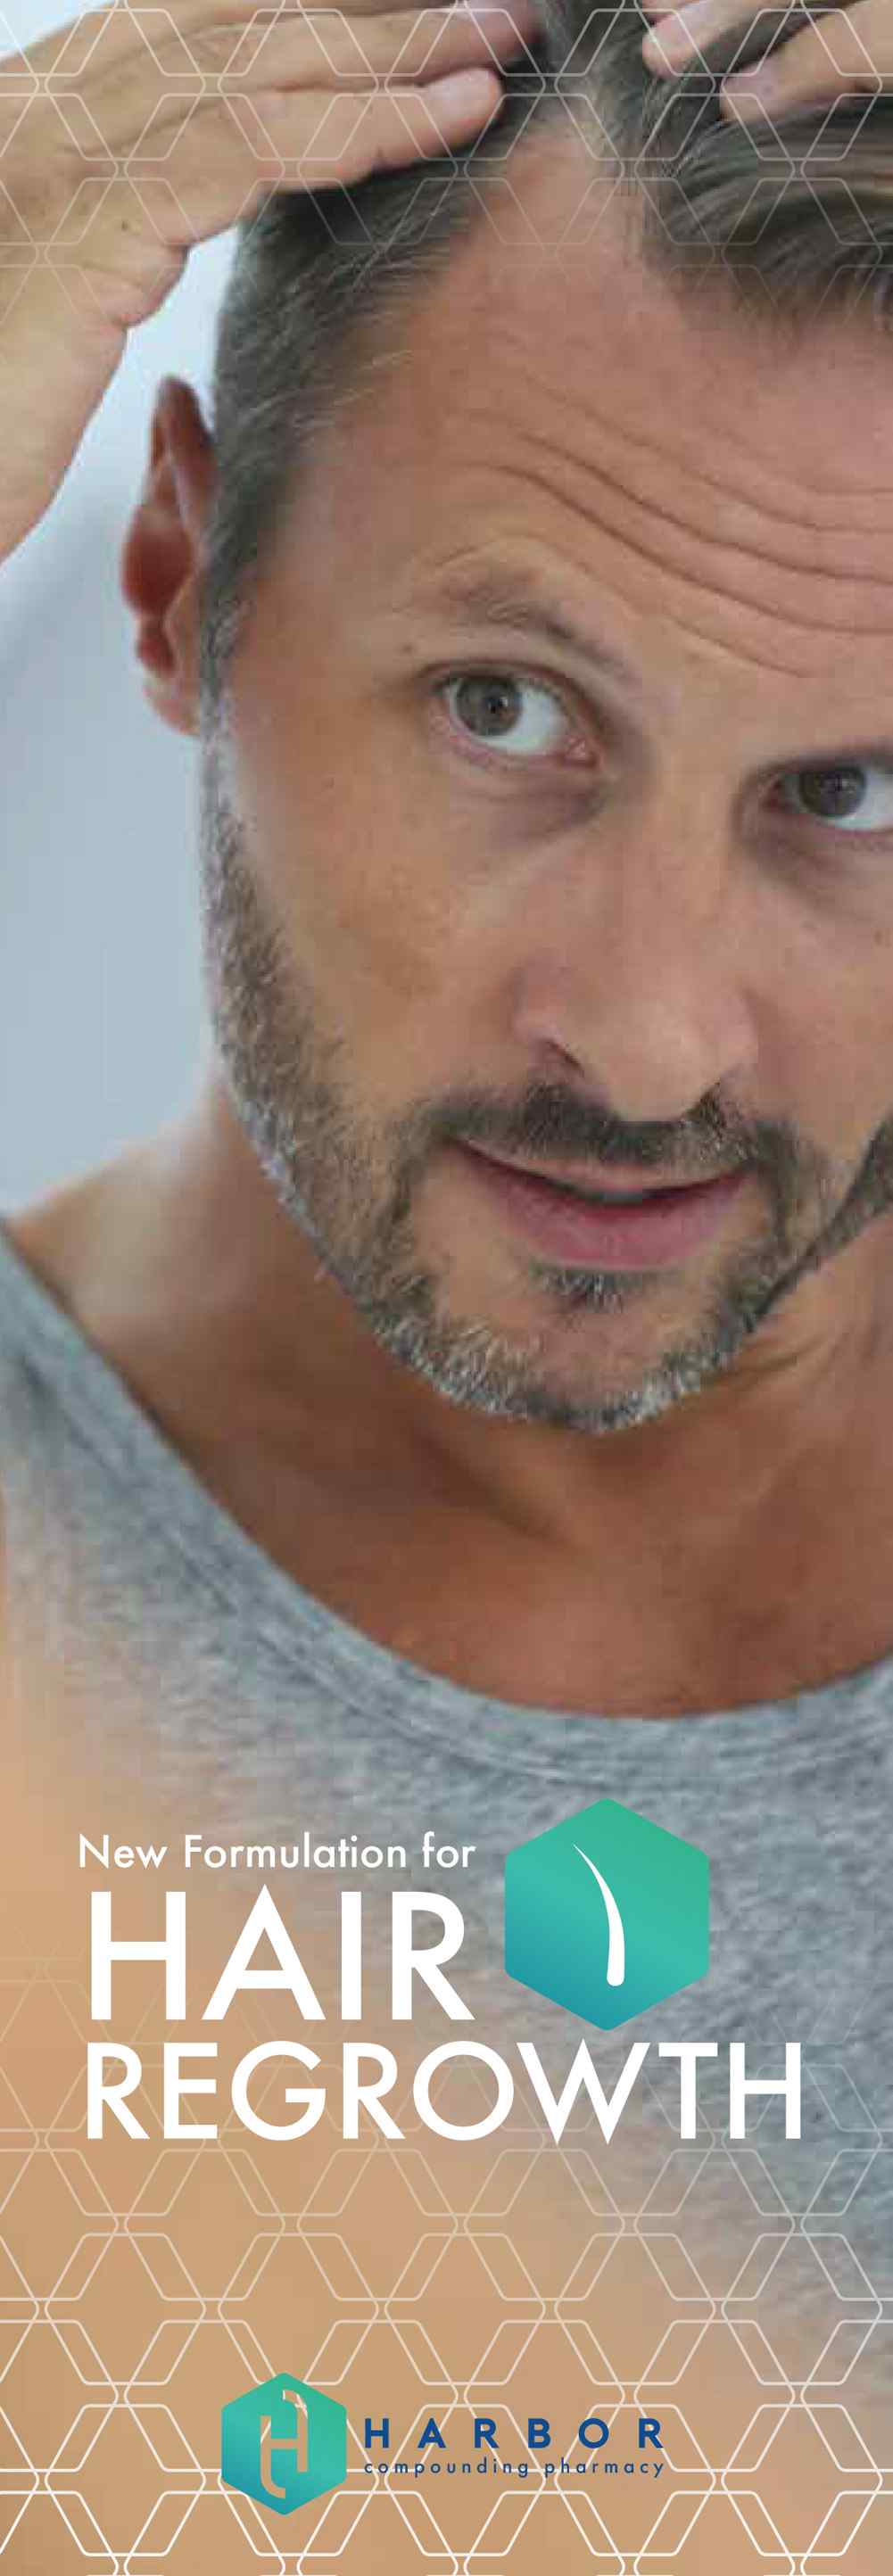 a man checking out improvement in his baldness, hair loss and hair thinning treatment product image